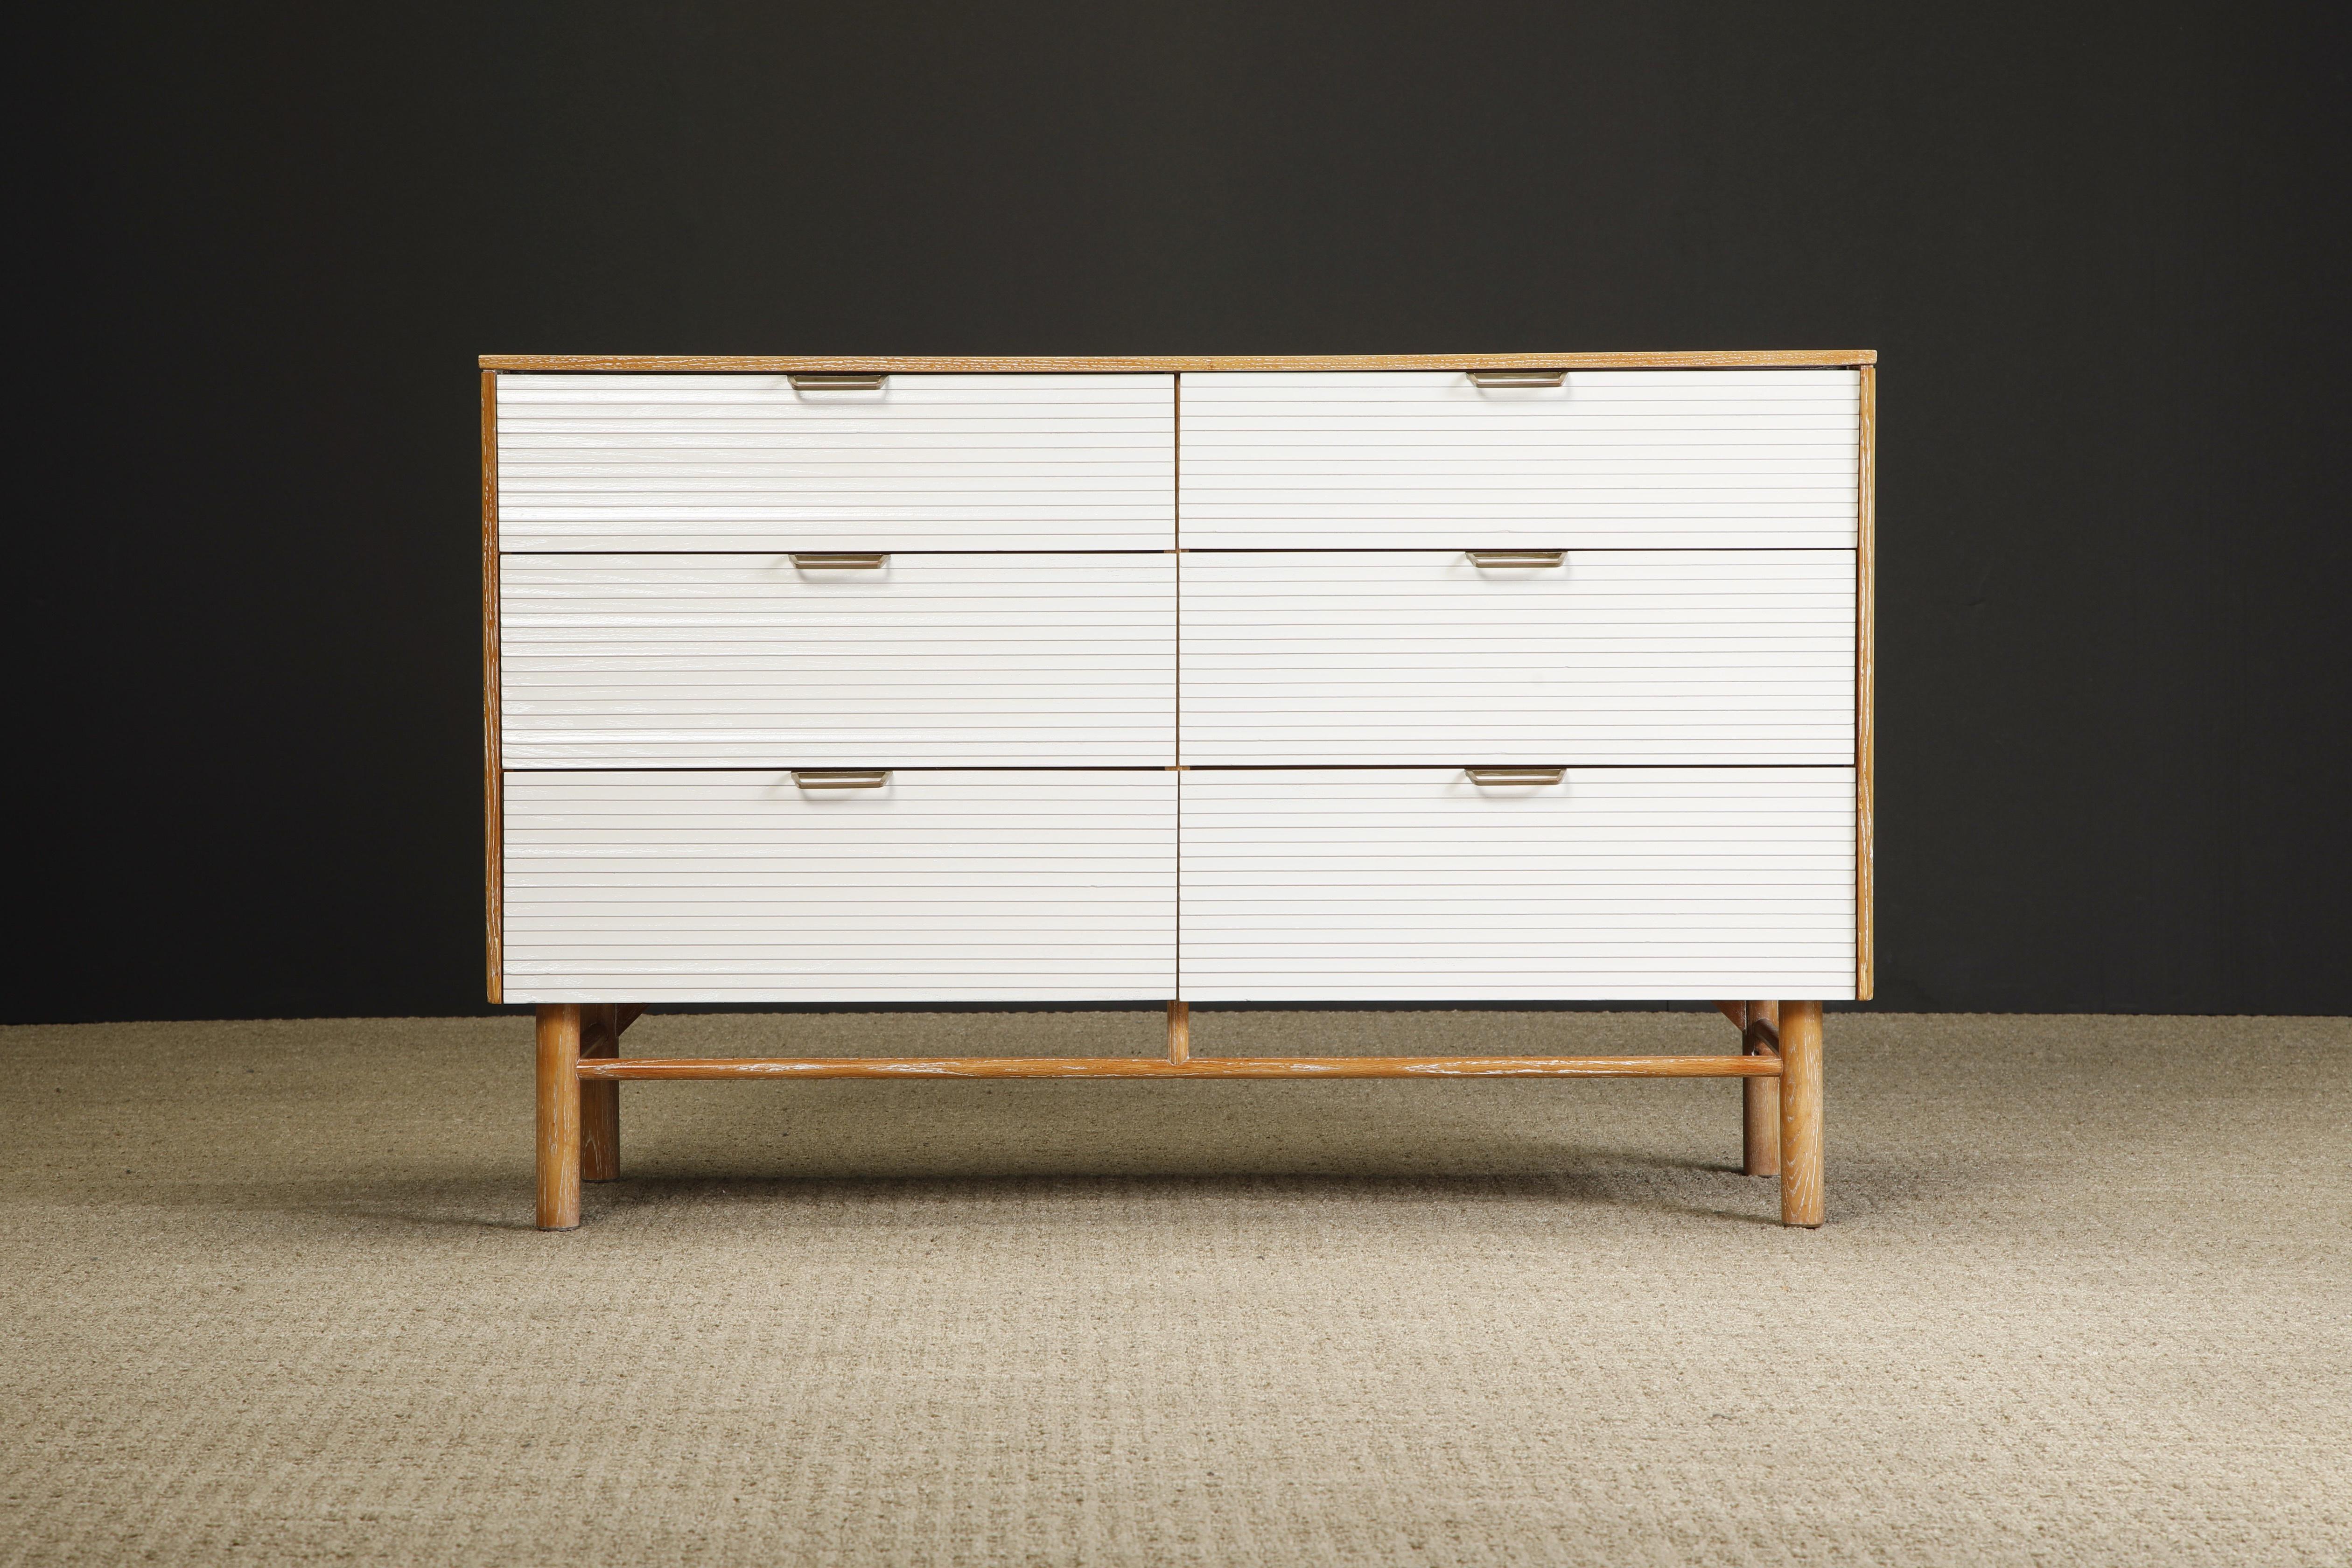 A desirable, rare and restored 6-drawer dresser by Raymond Loewy for Mengel, circa 1955, comprised of rift-sawn cerused oak with white lacquered drawer fronts and brass pulls. Signed in one drawer. This Mid-Century Modern collectors piece is ready